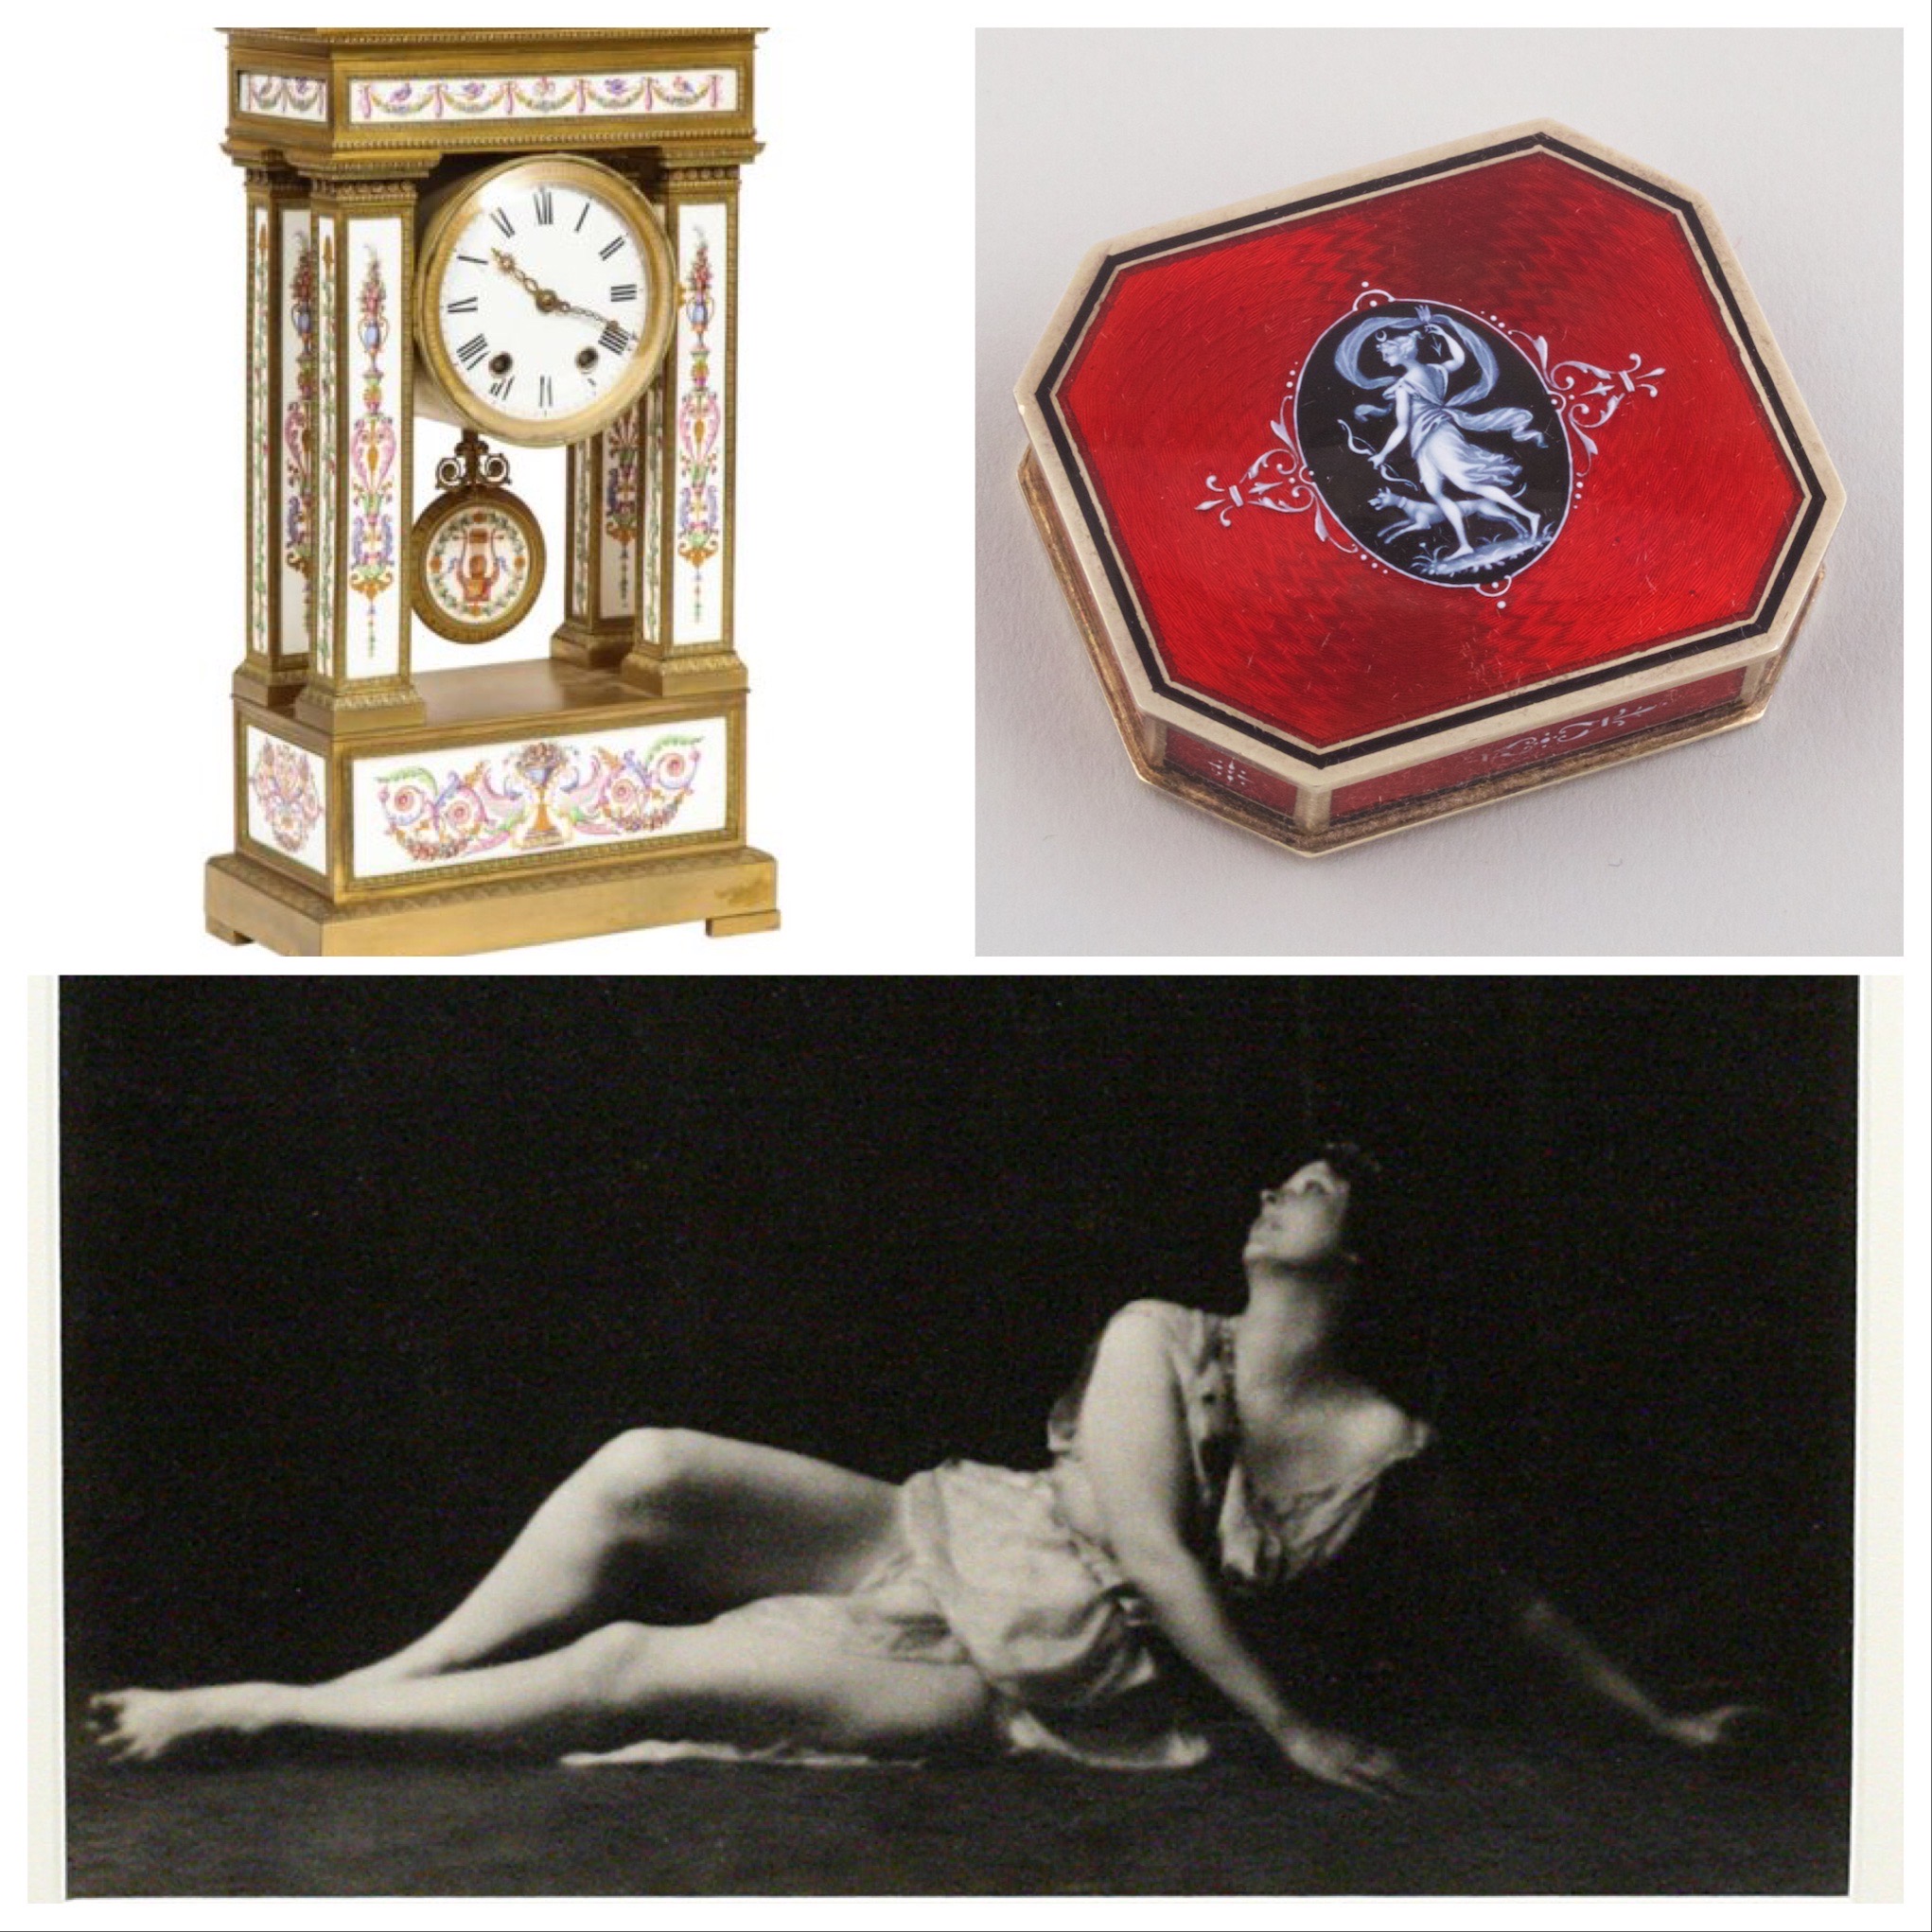 A Rare and Exquisite French Ormolu and Porcelain Clock, attributed to Deniere, Eugene Feuillatre Guilloche Enamel and Vermeil Box, Exquisite Iconic photograph of Isadora Duncan by Arnold Genthe - at Manhattan Art & Antiques Center